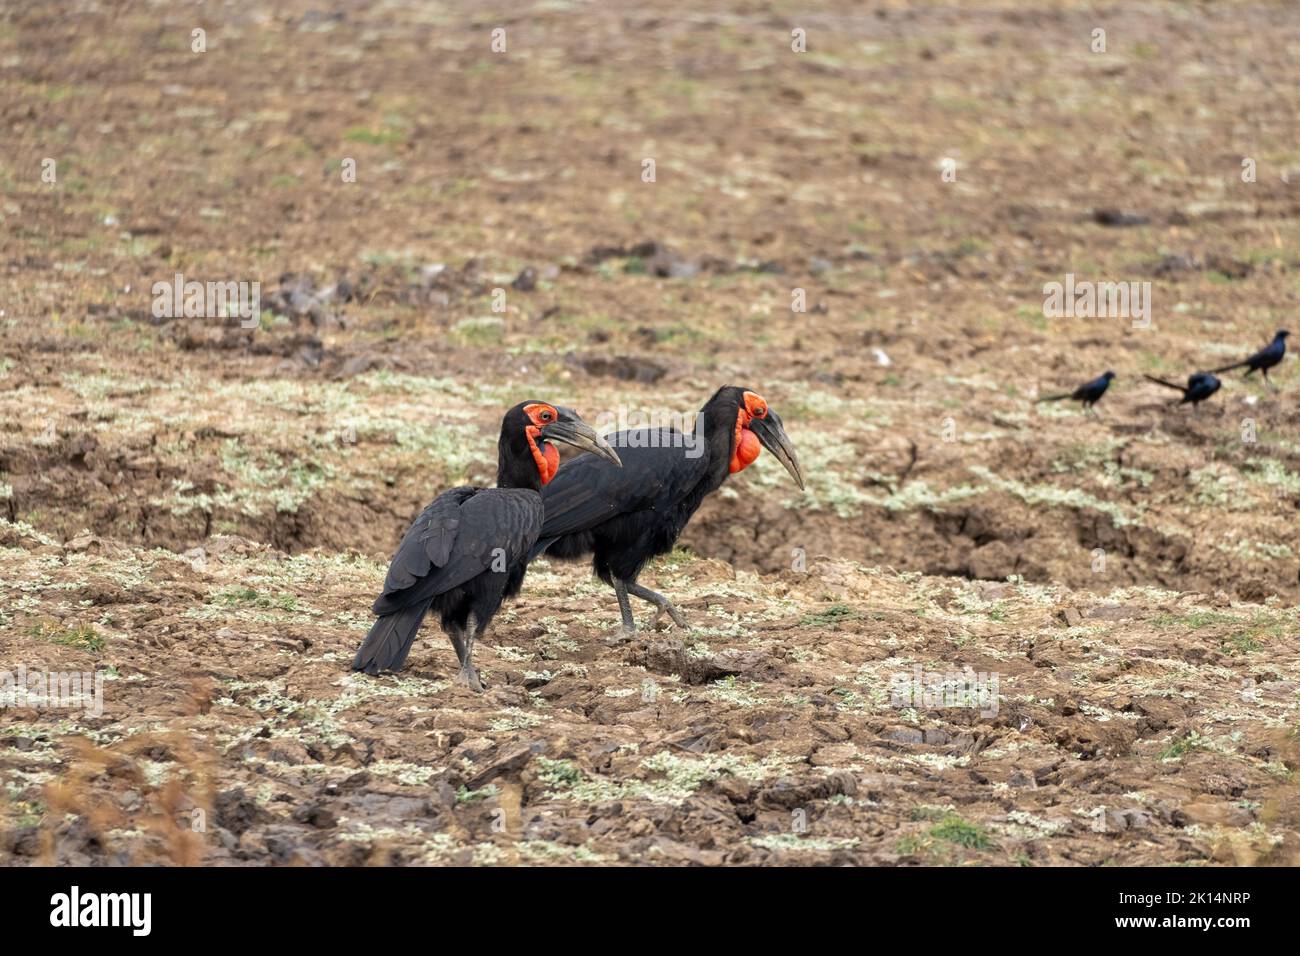 A close-up of two wonderful southern ground hornbill Stock Photo